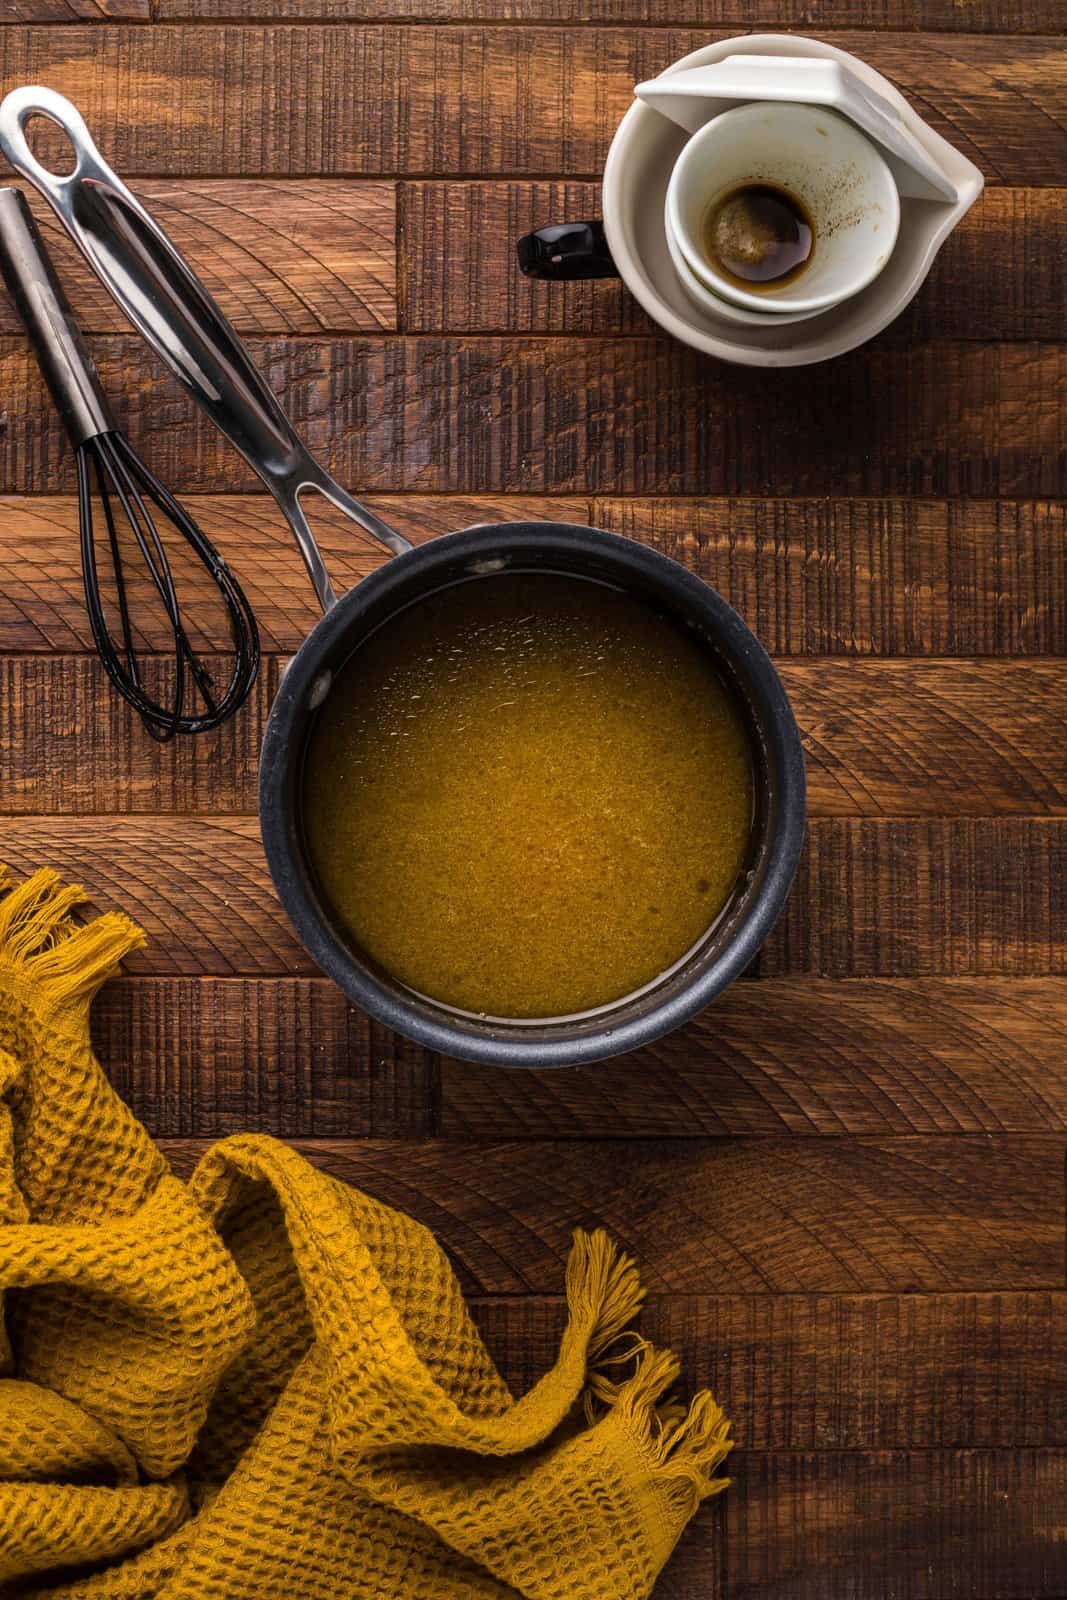 Apple cider vinegar, worcheshire sauce, olive oil, and garlic paste whisked together in saucepan.